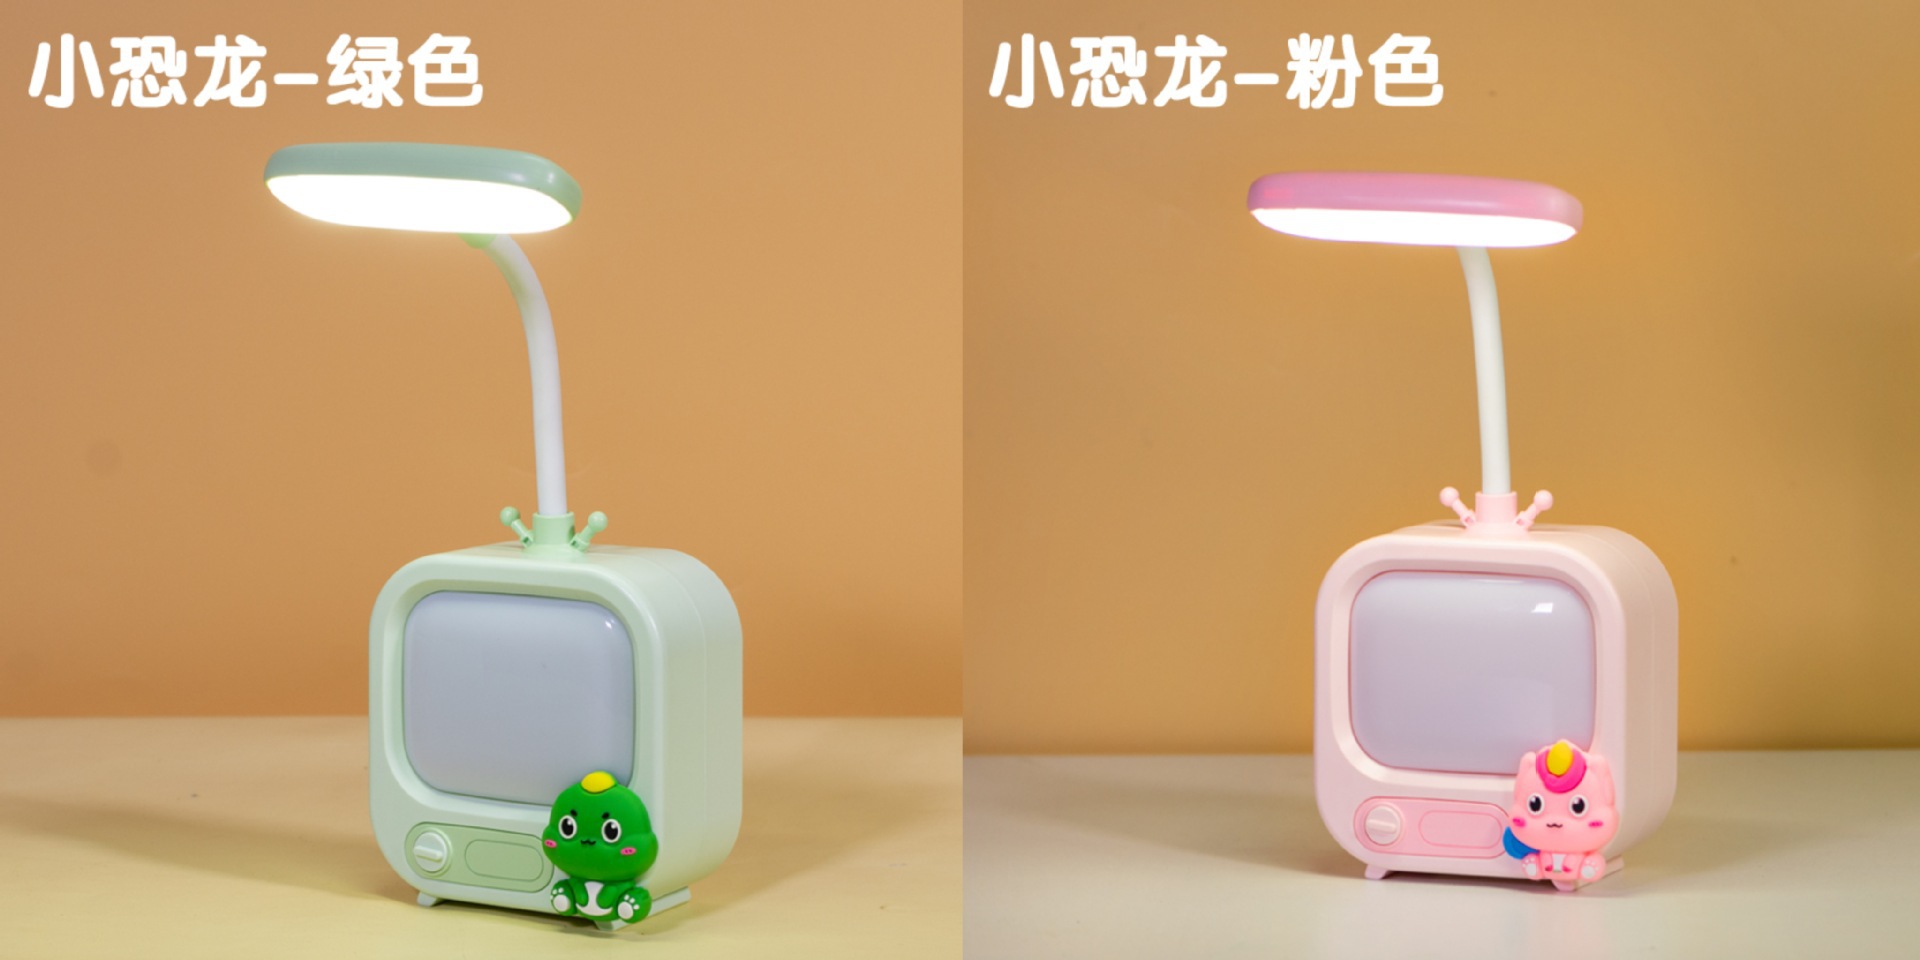 Cartoon TV Student Dormitory Reading Led Small Night Lamp Bedroom Bedside Table Lamp Children's Rechargeable Study Light